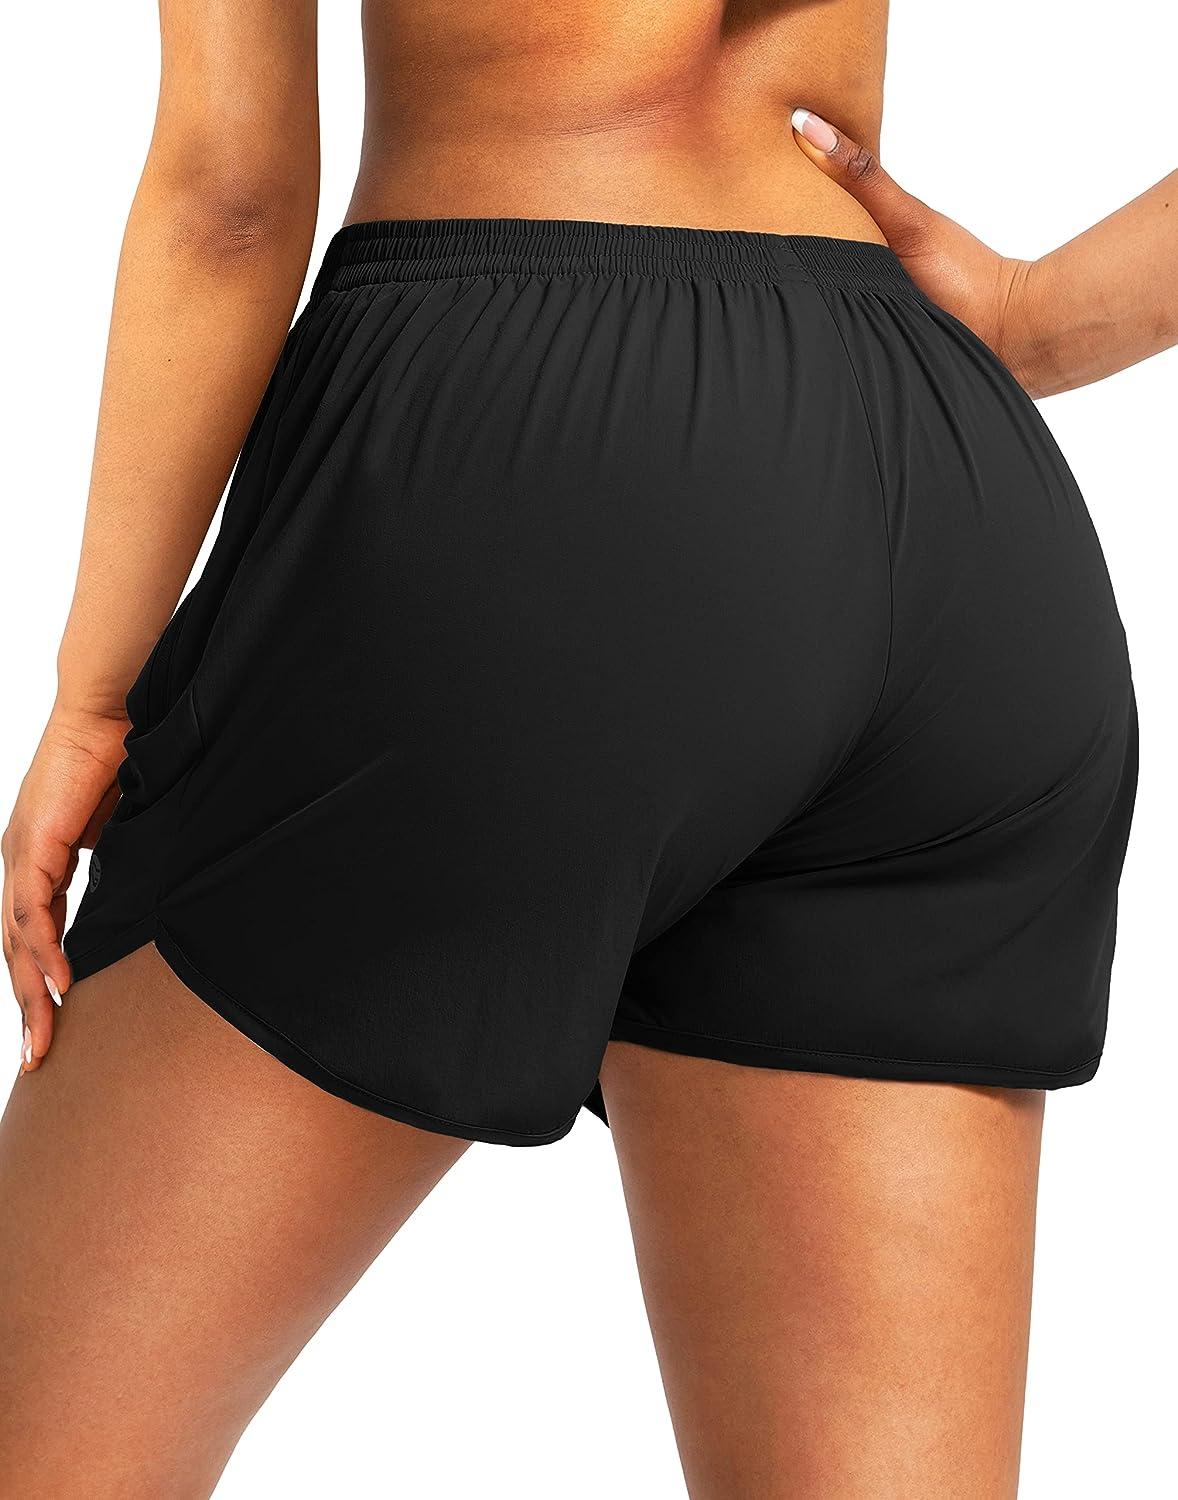 Buy Athletic Shorts for Women Elastic High Waisted Running Shorts with  Zipper Pocket Comfy Casual Gym Workout Shorts with Liner, Black, Large at